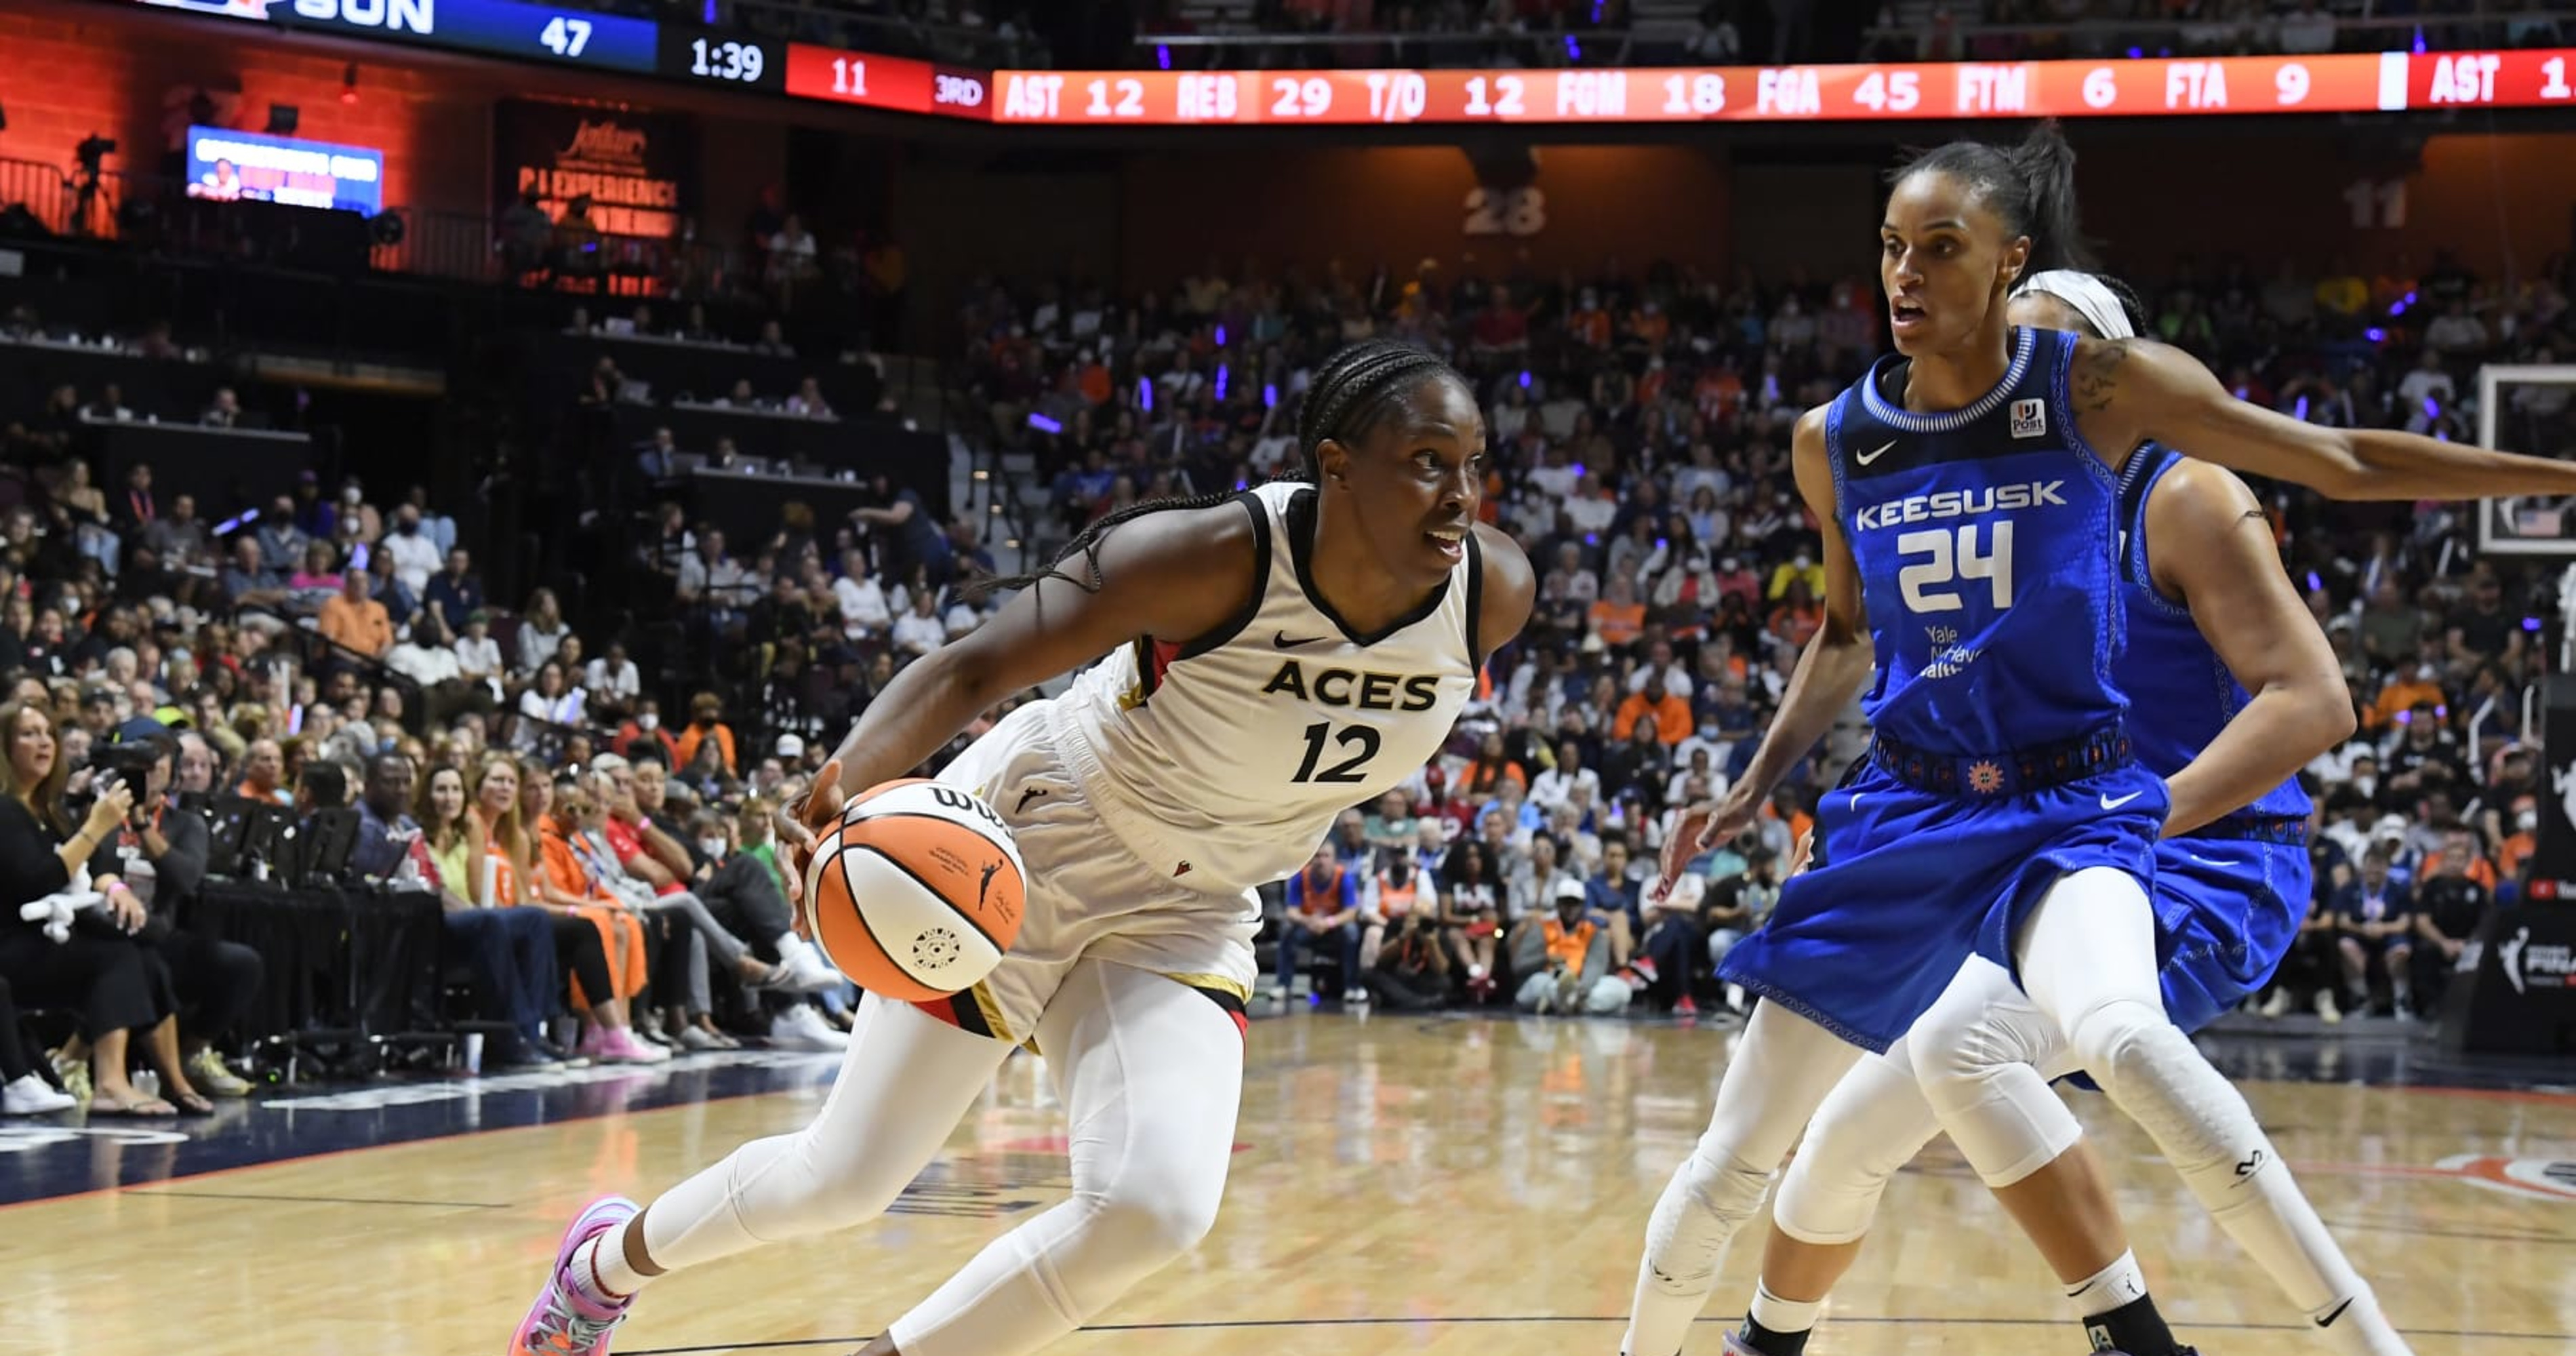 Aces Win 1st WNBA Championship in LV History After Beating Sun; Chelsea